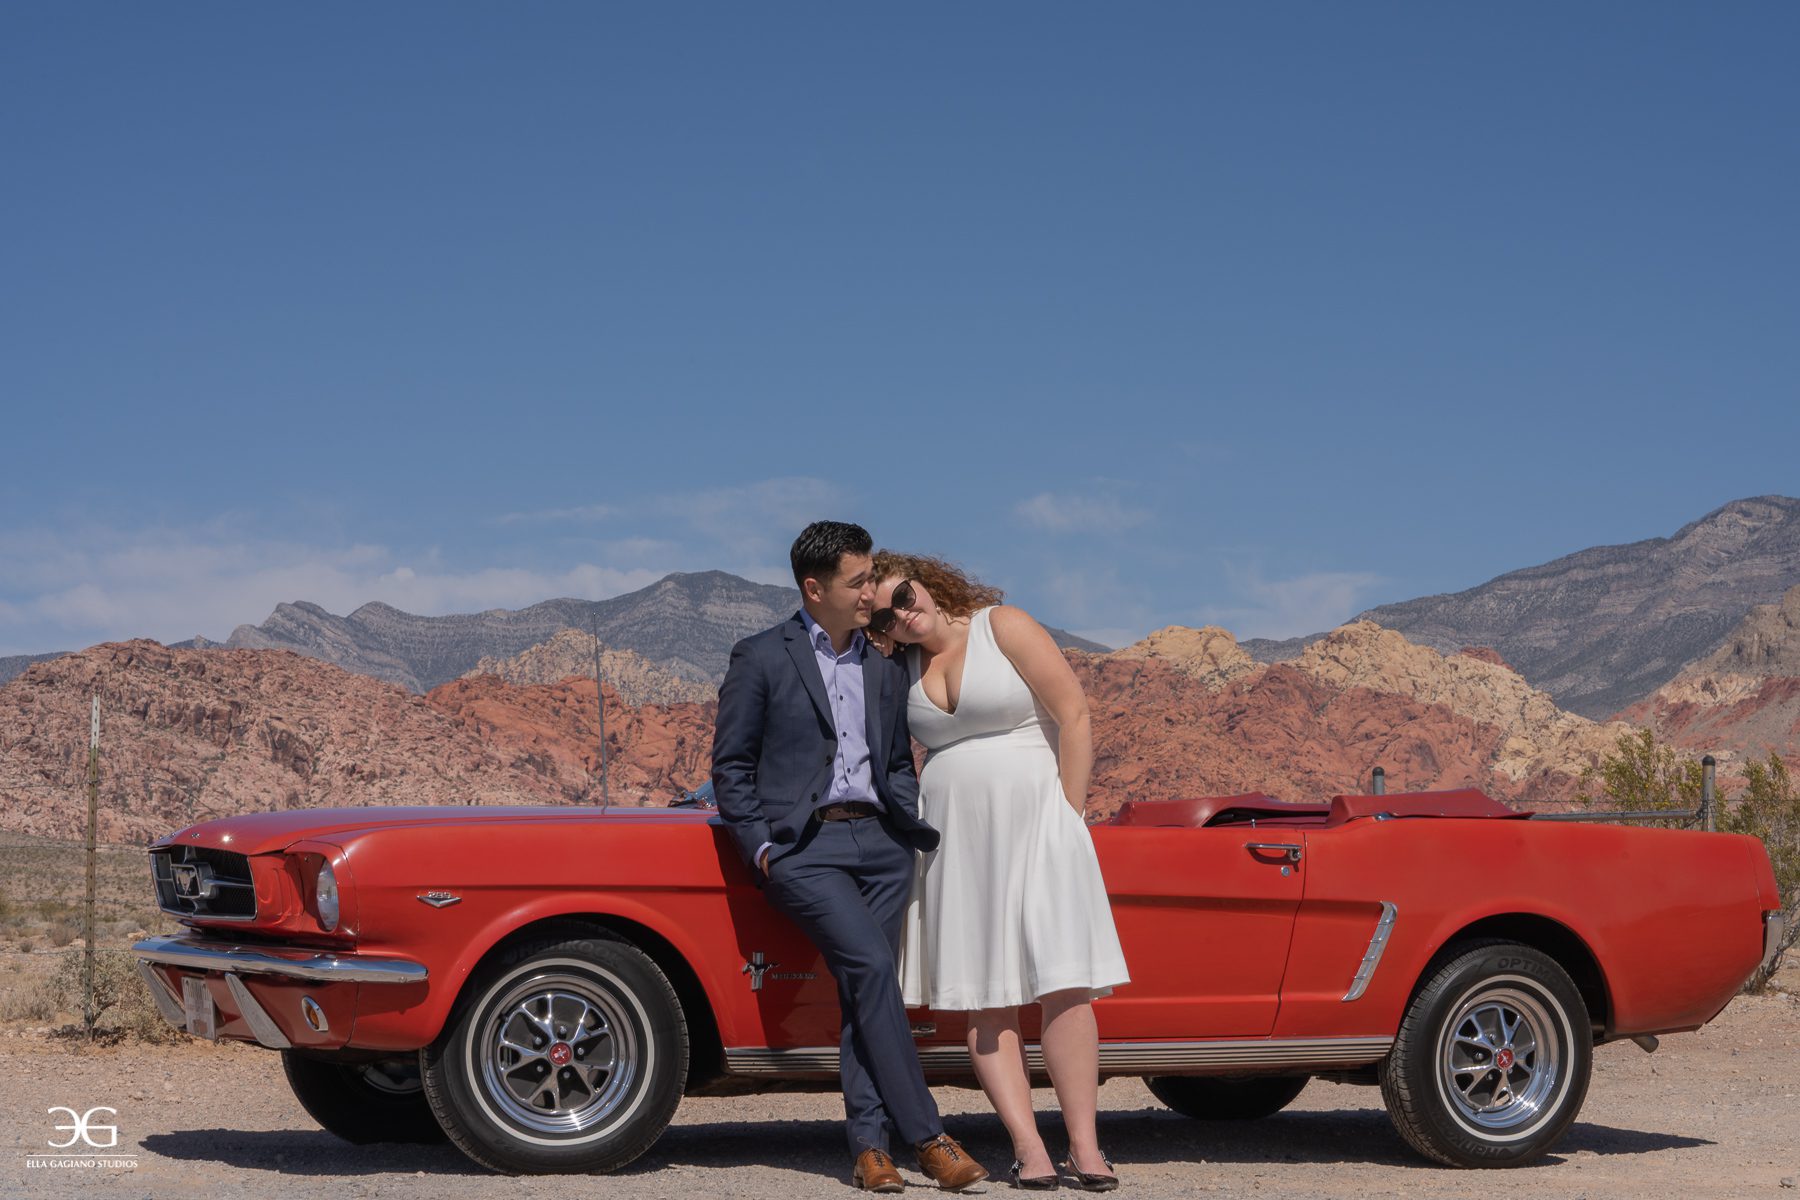 Desert Engagement Photoshoot – MAKE IT UNIQUE WITH ONLY 1 ADDITION